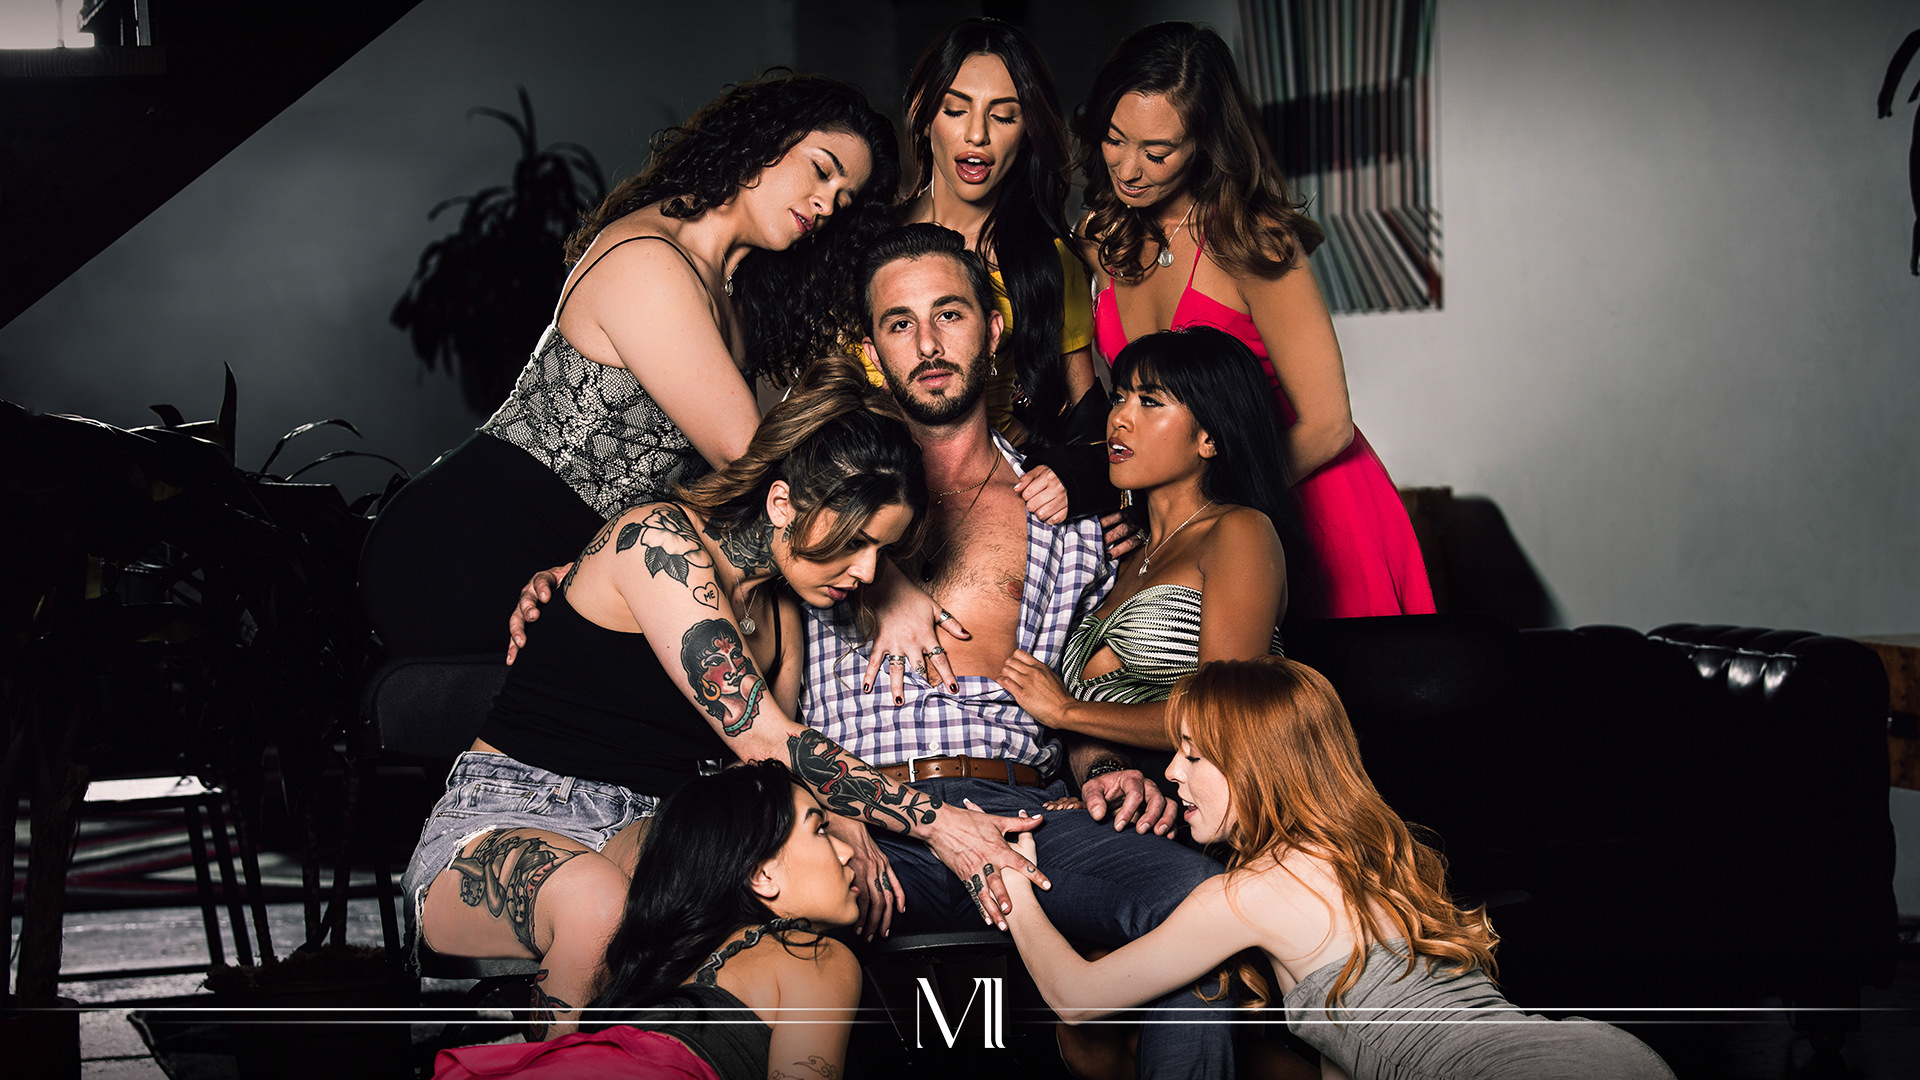 Christy Love, Victoria Voxxx, Lucas Frost, Hime Marie, Ember Snow, Madi Collins, Kimmy Kimm, Vanessa Vega “Sinners Anonymous” ModernDaySins